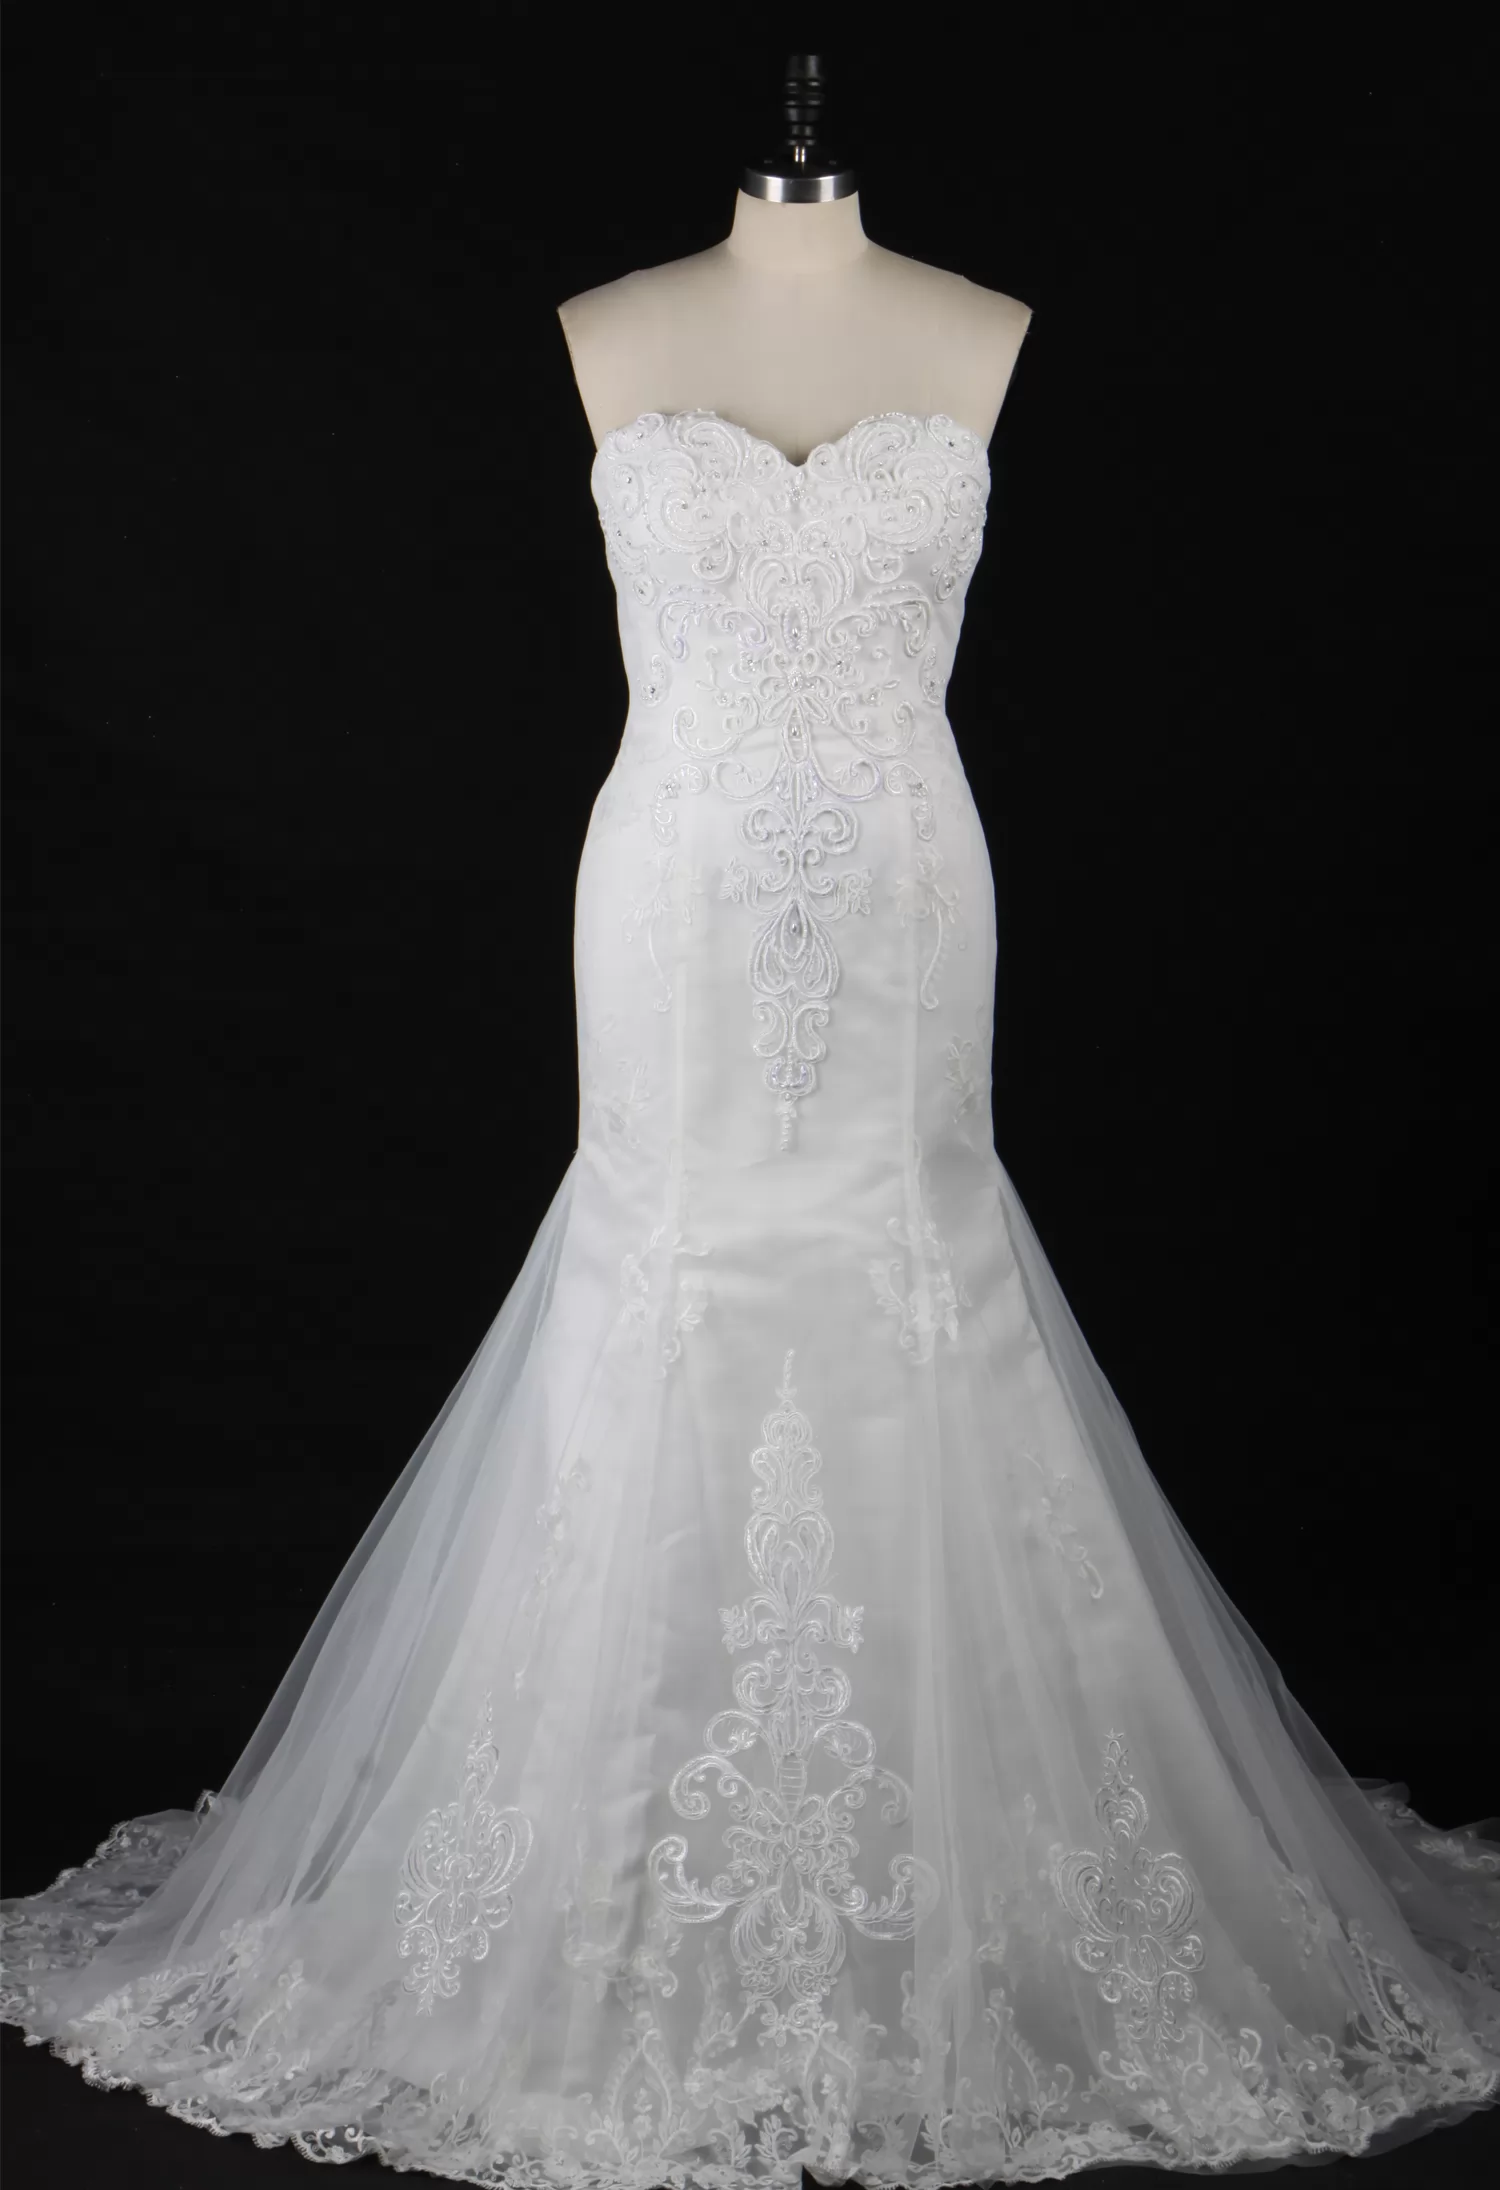 Dramatic Mermaid Wedding Dress With Graphic Lace